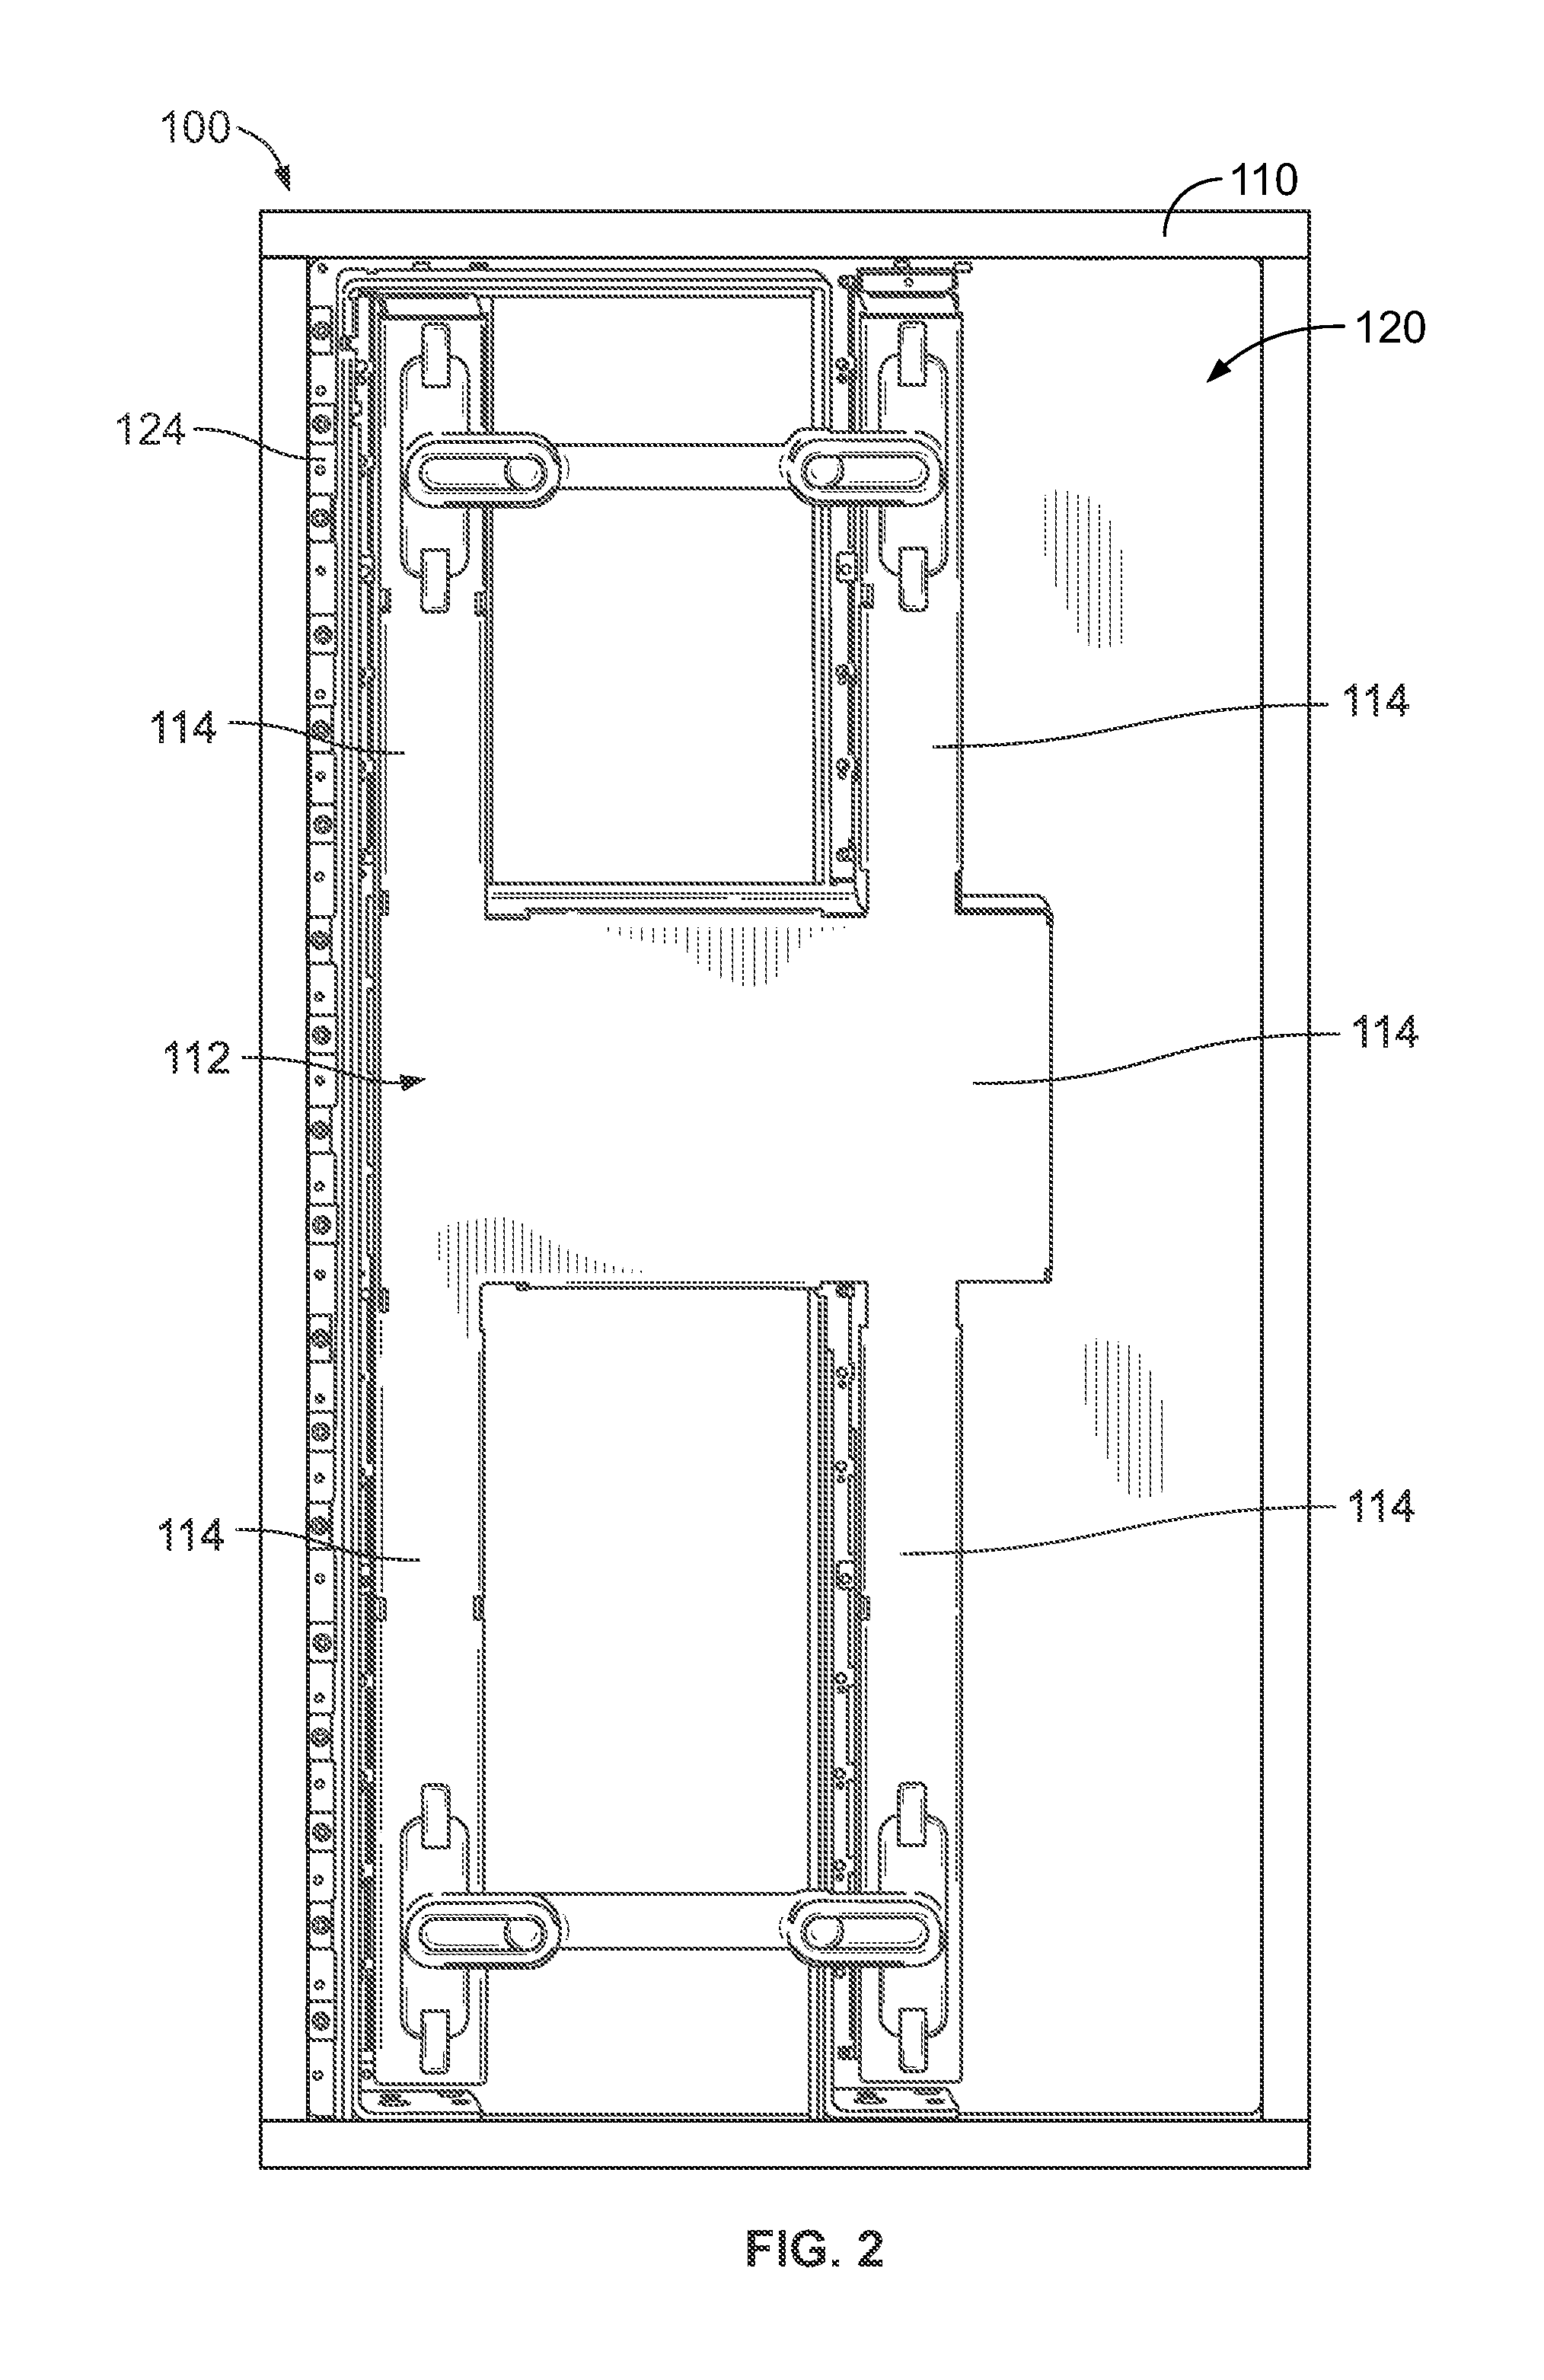 Cable backplane system having stiffeners